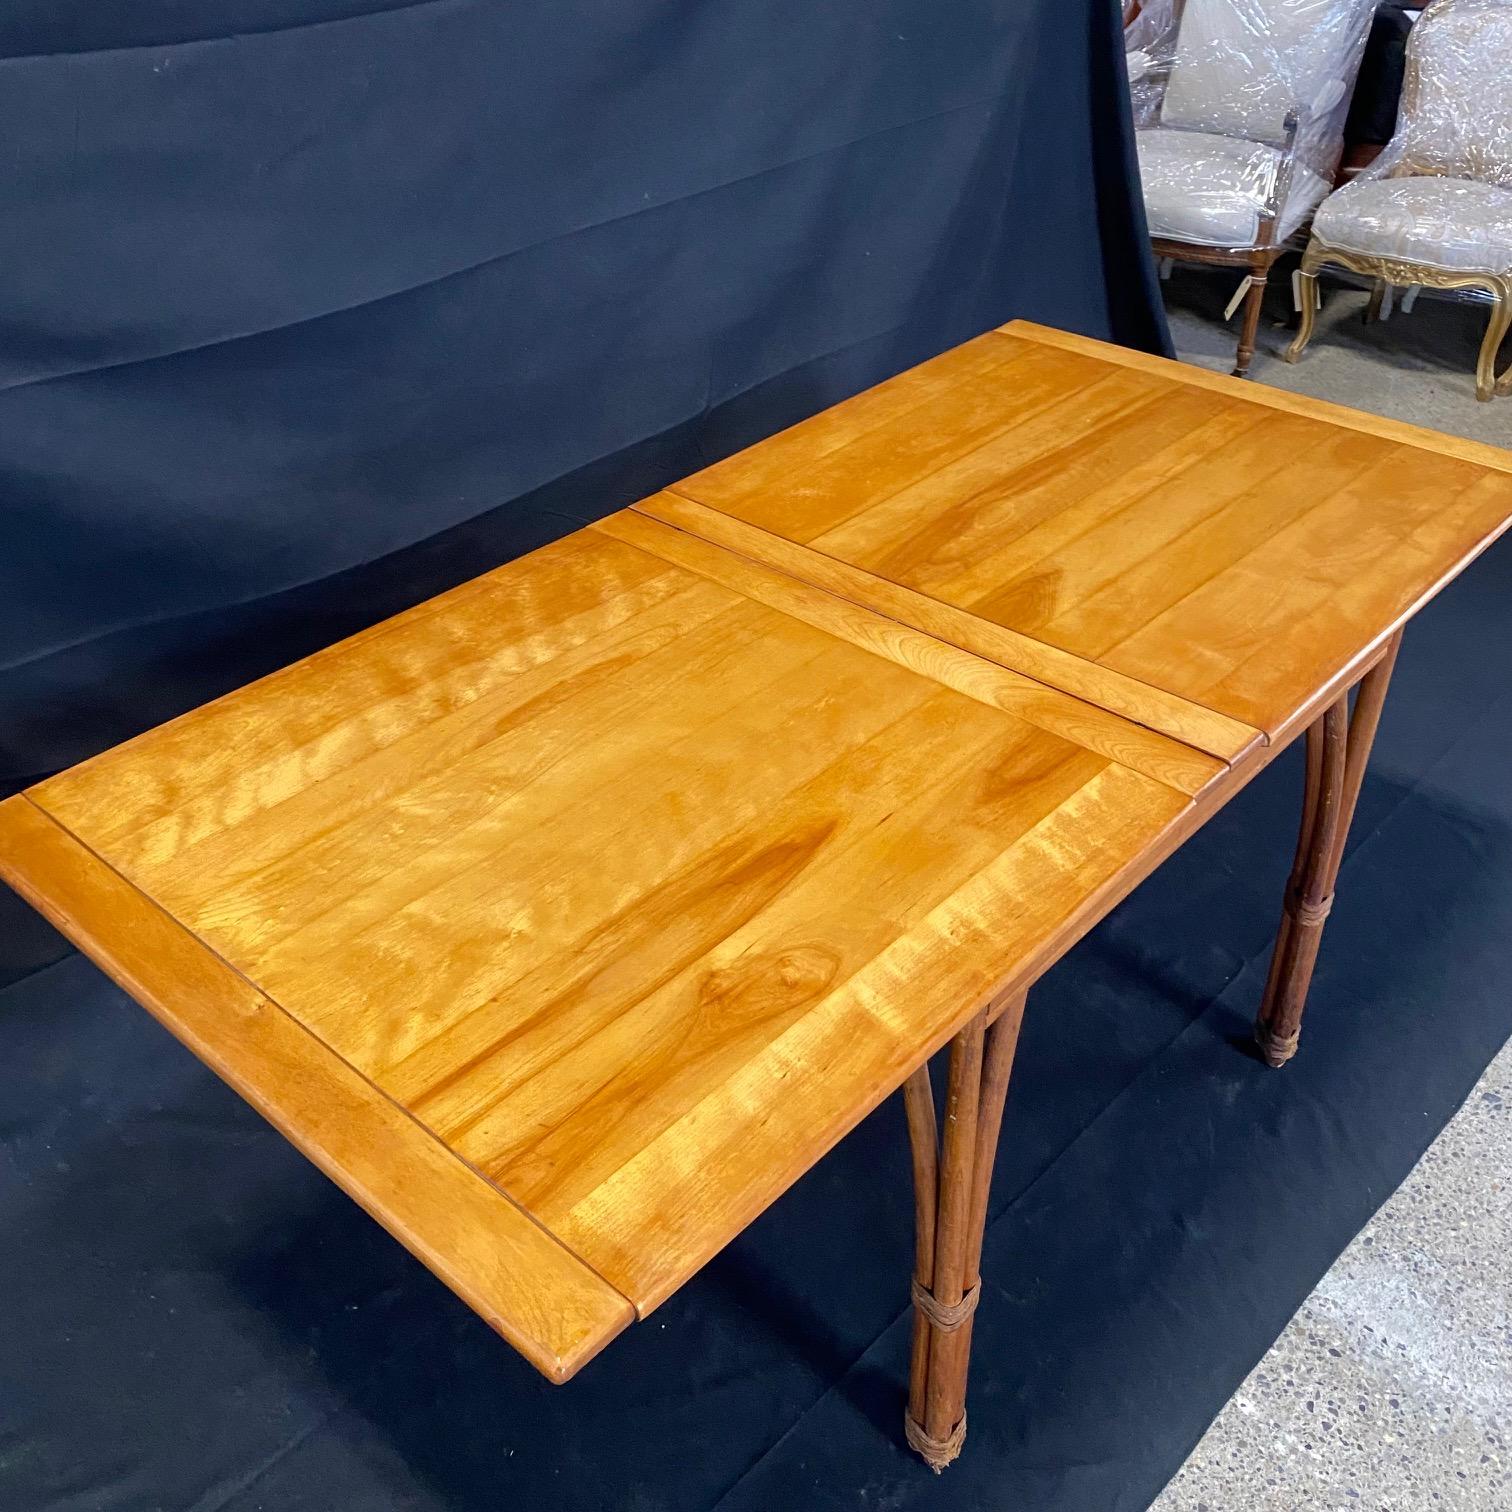 Rattan and maple super stylish and versatile Heywood Wakefield Hollywood Regency style faux bamboo dining table that expands to double its size. From the fabulous 1940s. Table when open and extended:
H 28”
D 32.5”
W 64.5”
Table when closed